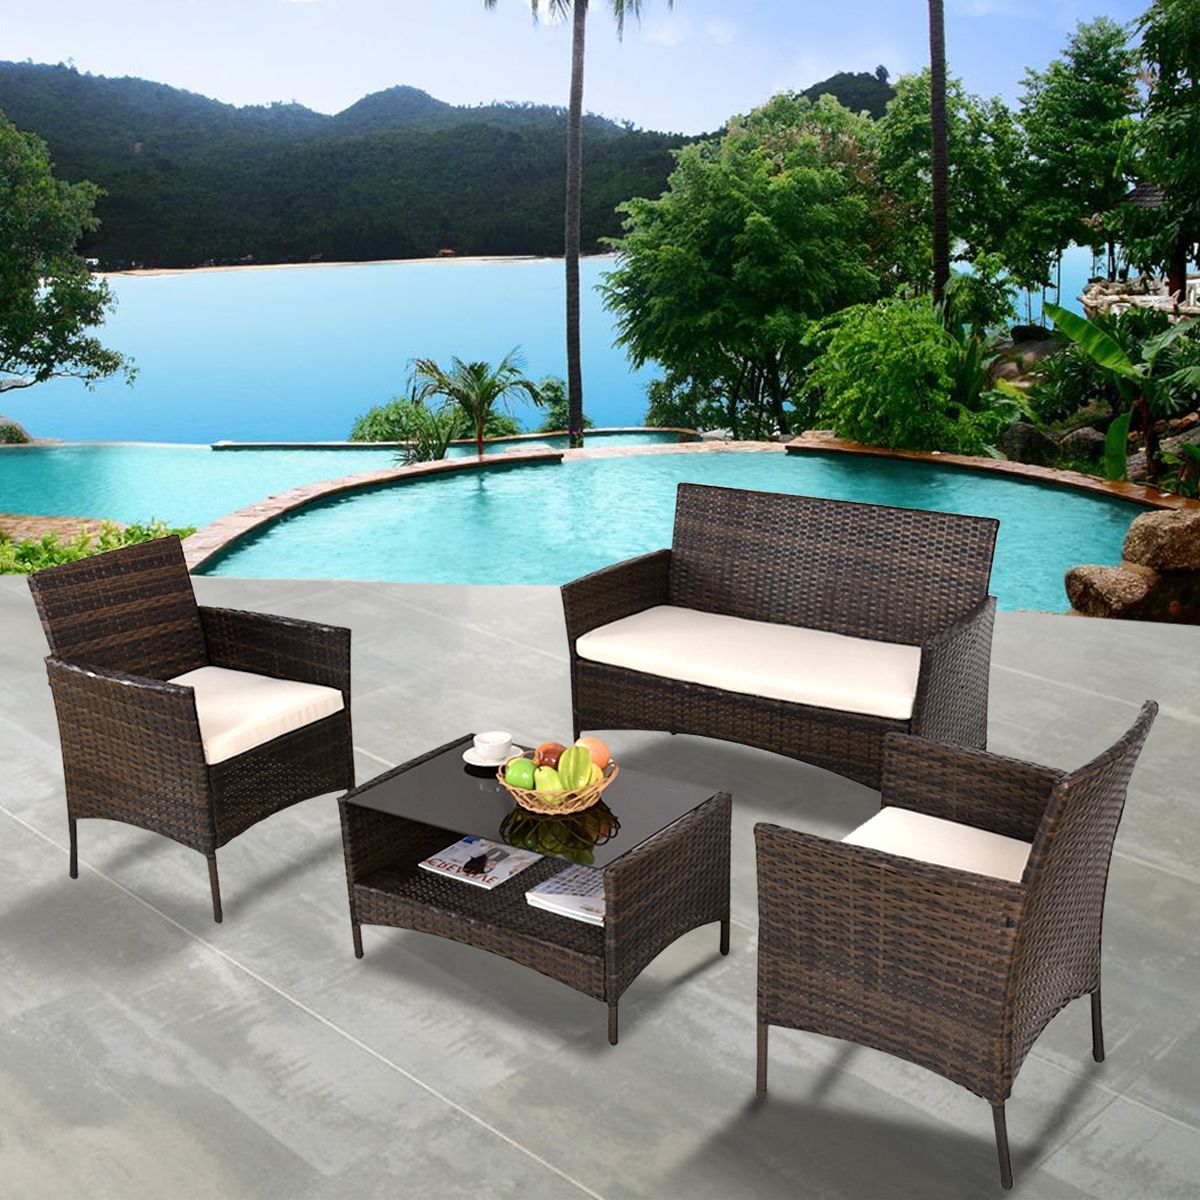 Wicker Beige Cushion Outdoor Patio Sets Throughout Fashionable Costway 4 Pcs Outdoor Patio Rattan Furniture Set Table Shelf Sofa With (View 1 of 15)